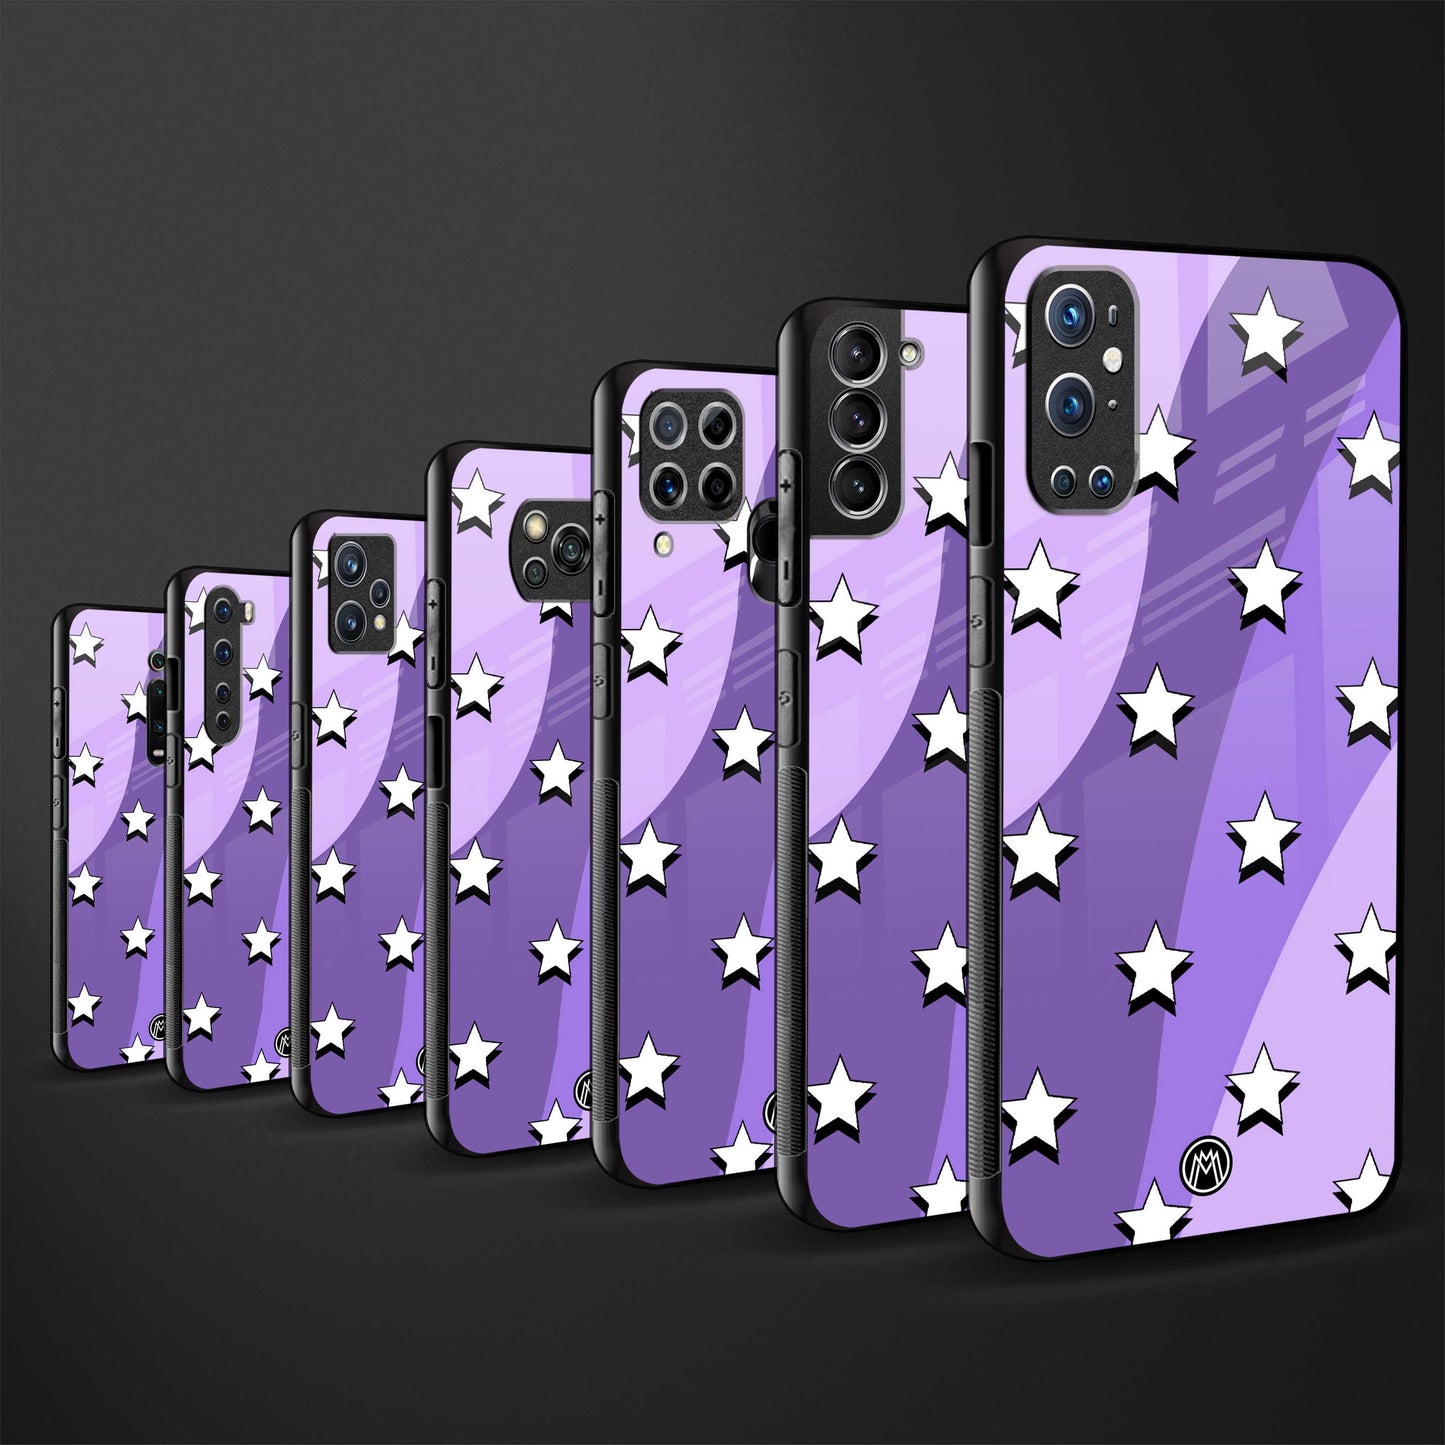 lost in paradise grape edition back phone cover | glass case for vivo y22